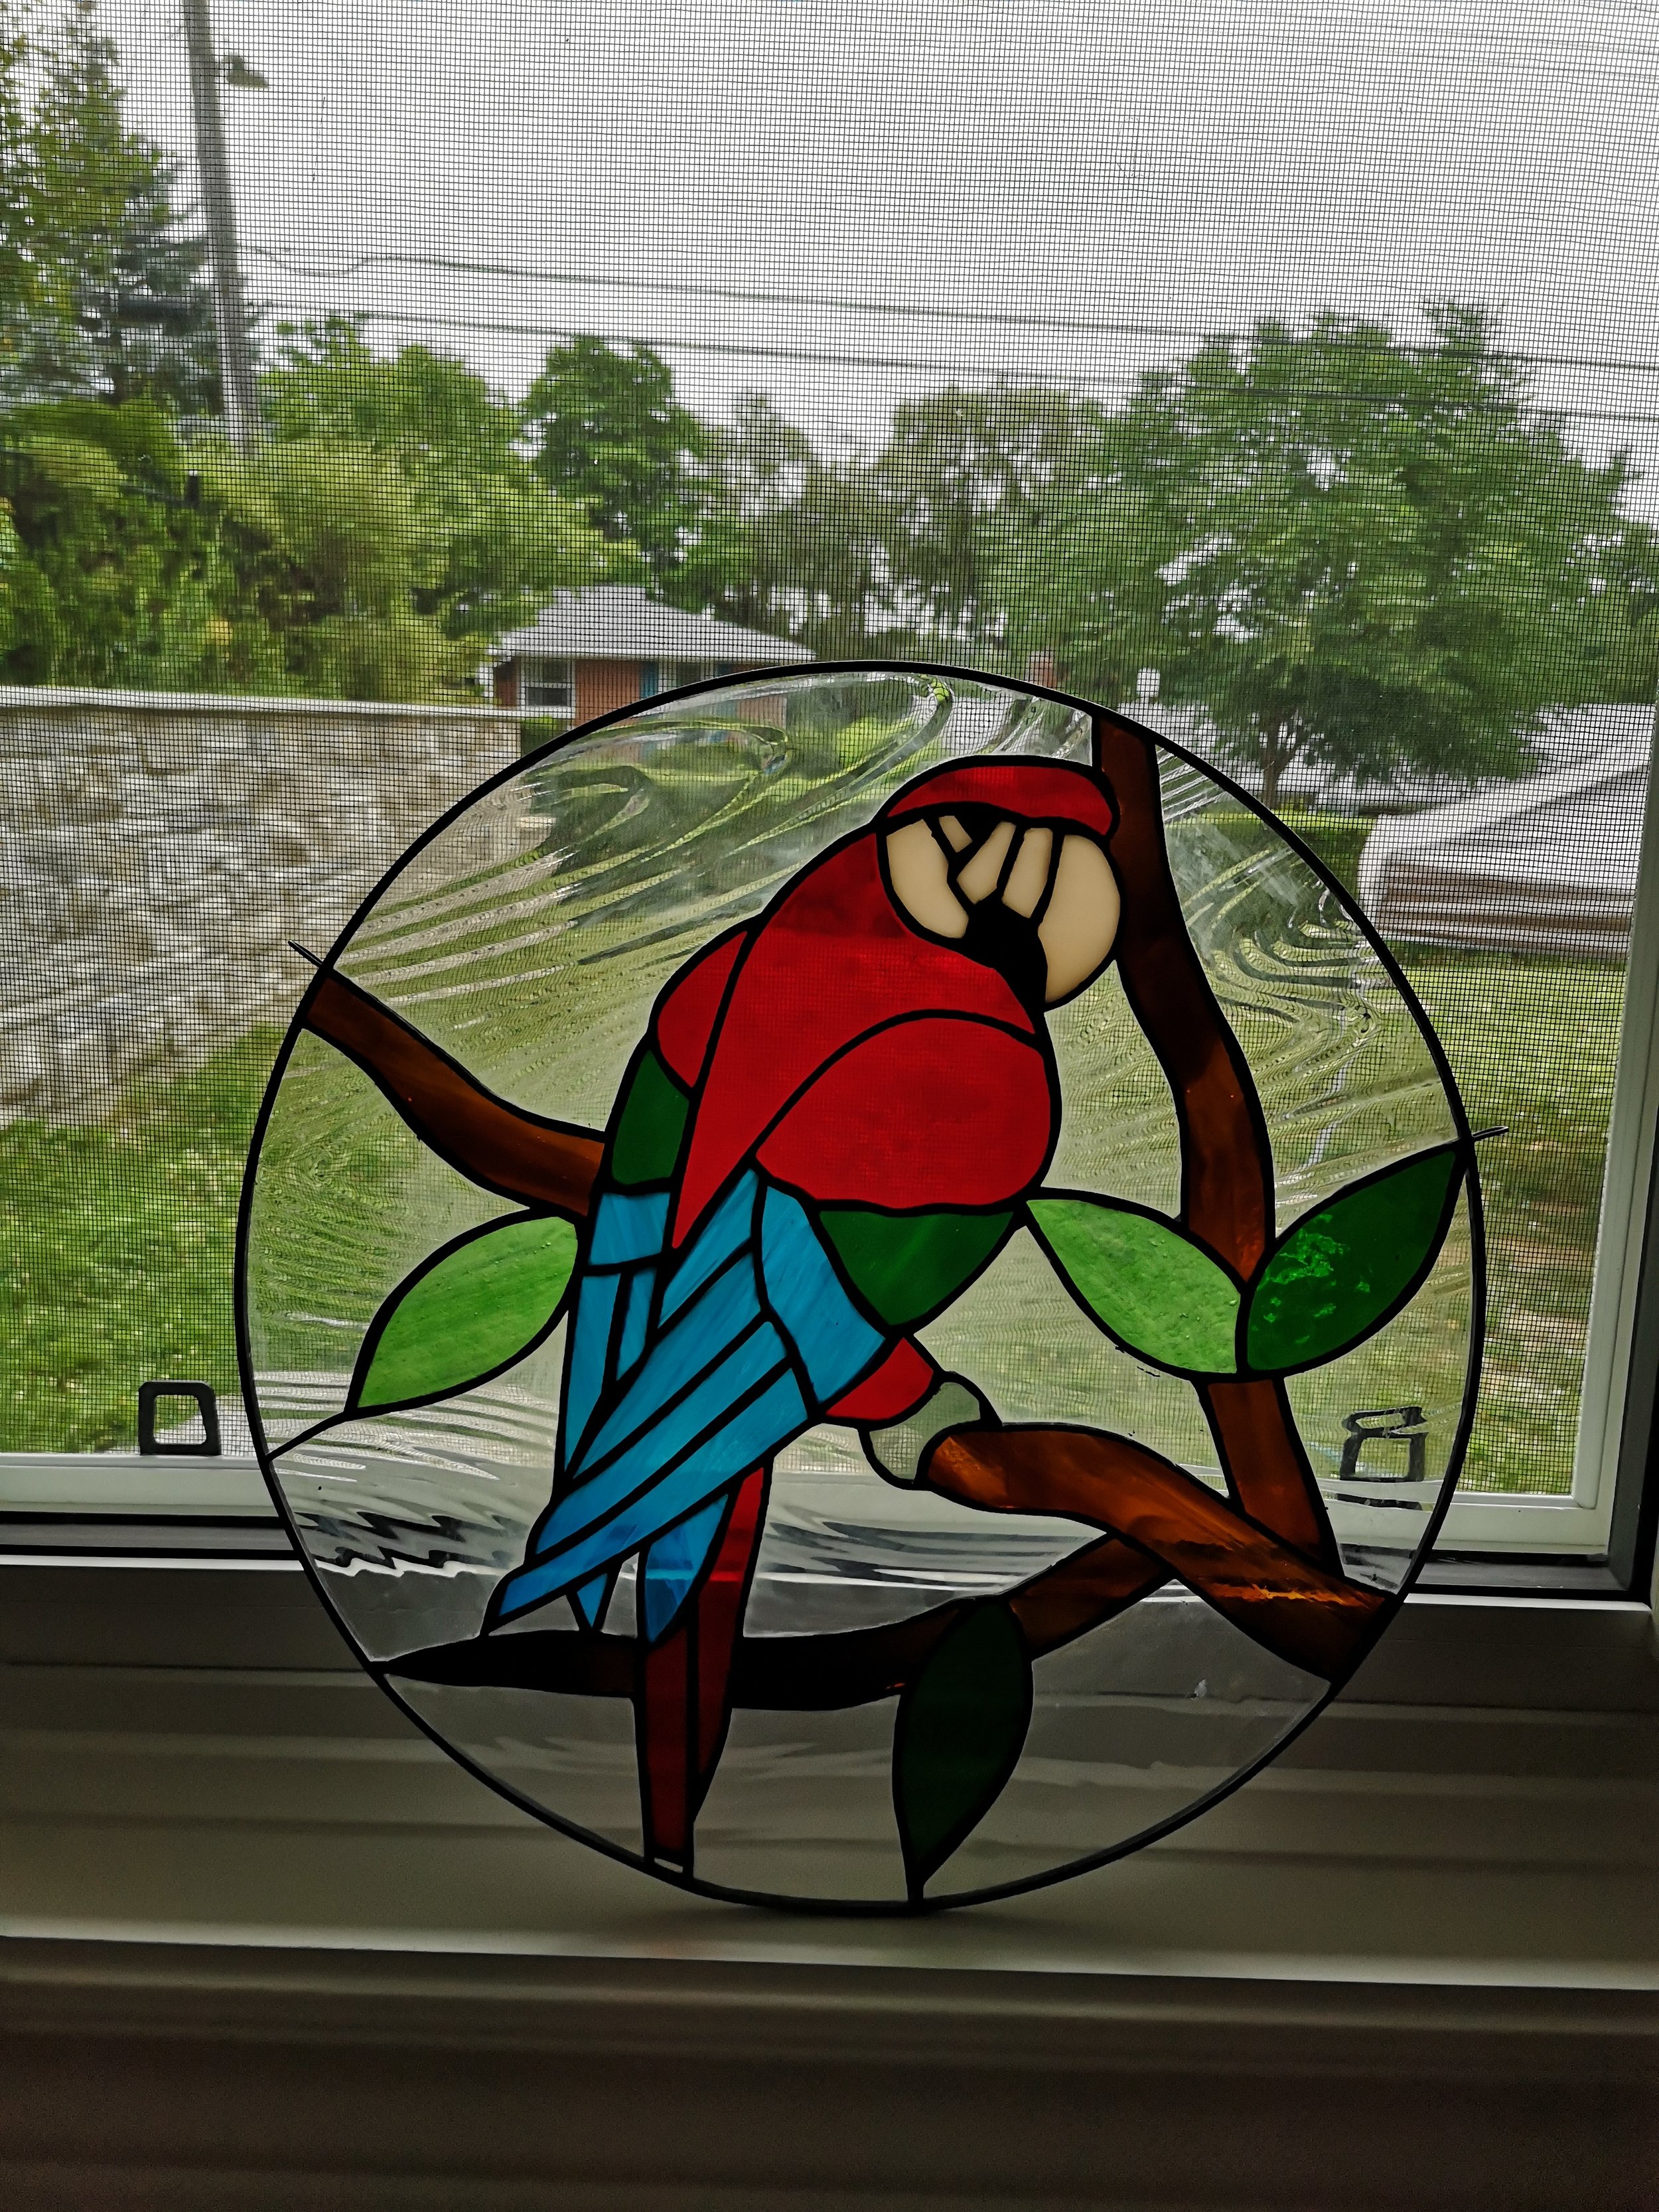 Shop — Cutting Edge Stained Glass